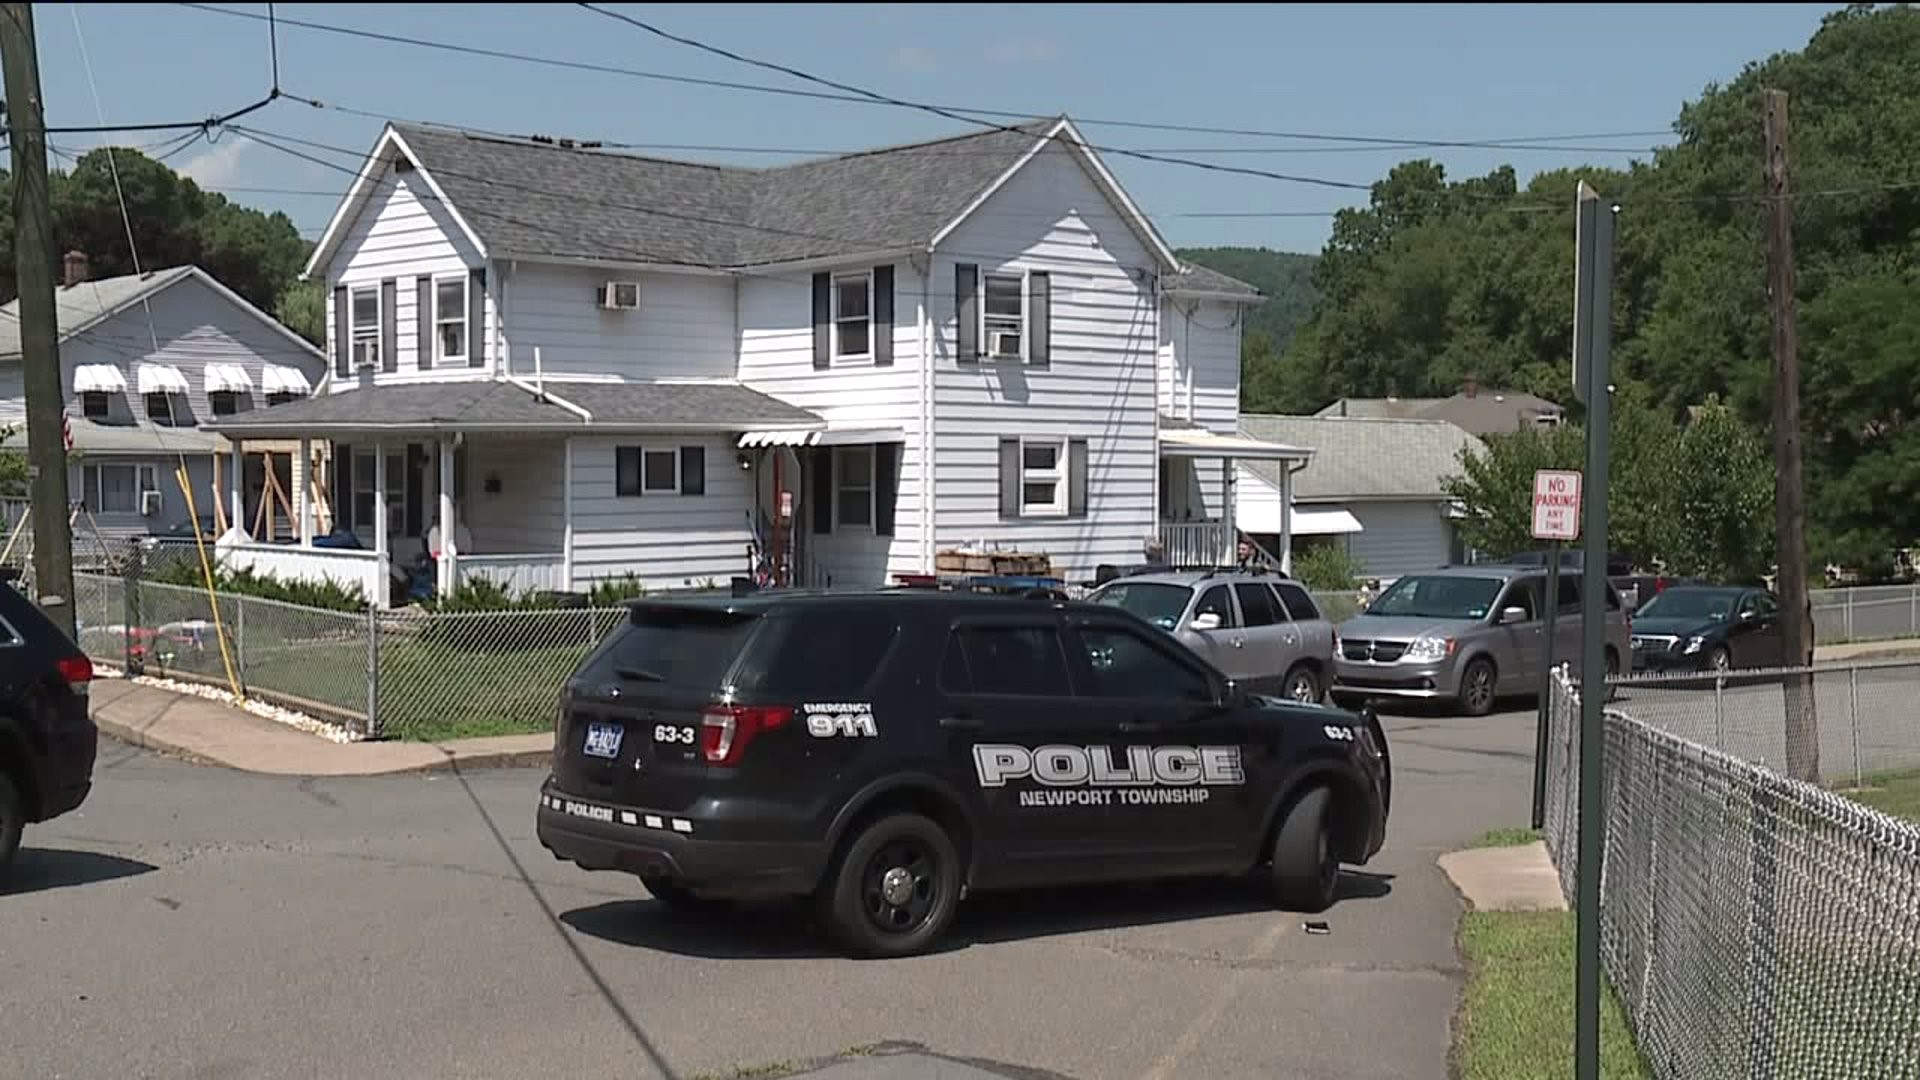 Man in Custody After Standoff with Police in Nanticoke